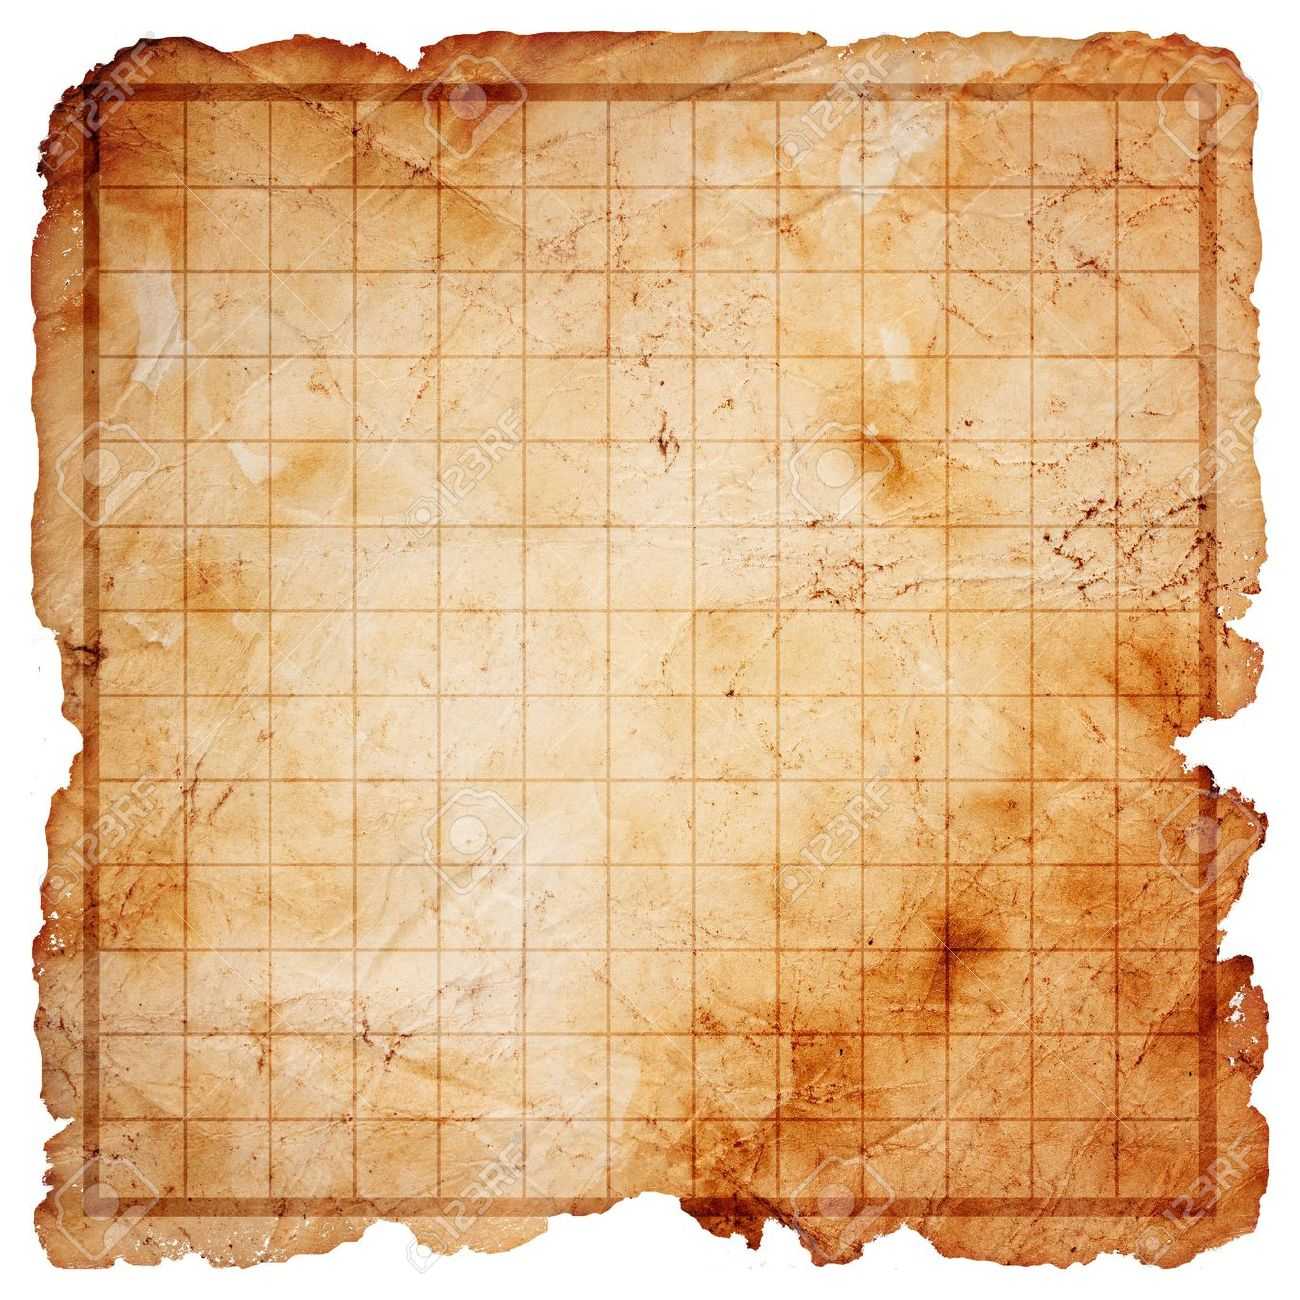 Blank Pirate Treasure Map Throughout Blank Pirate Map Template